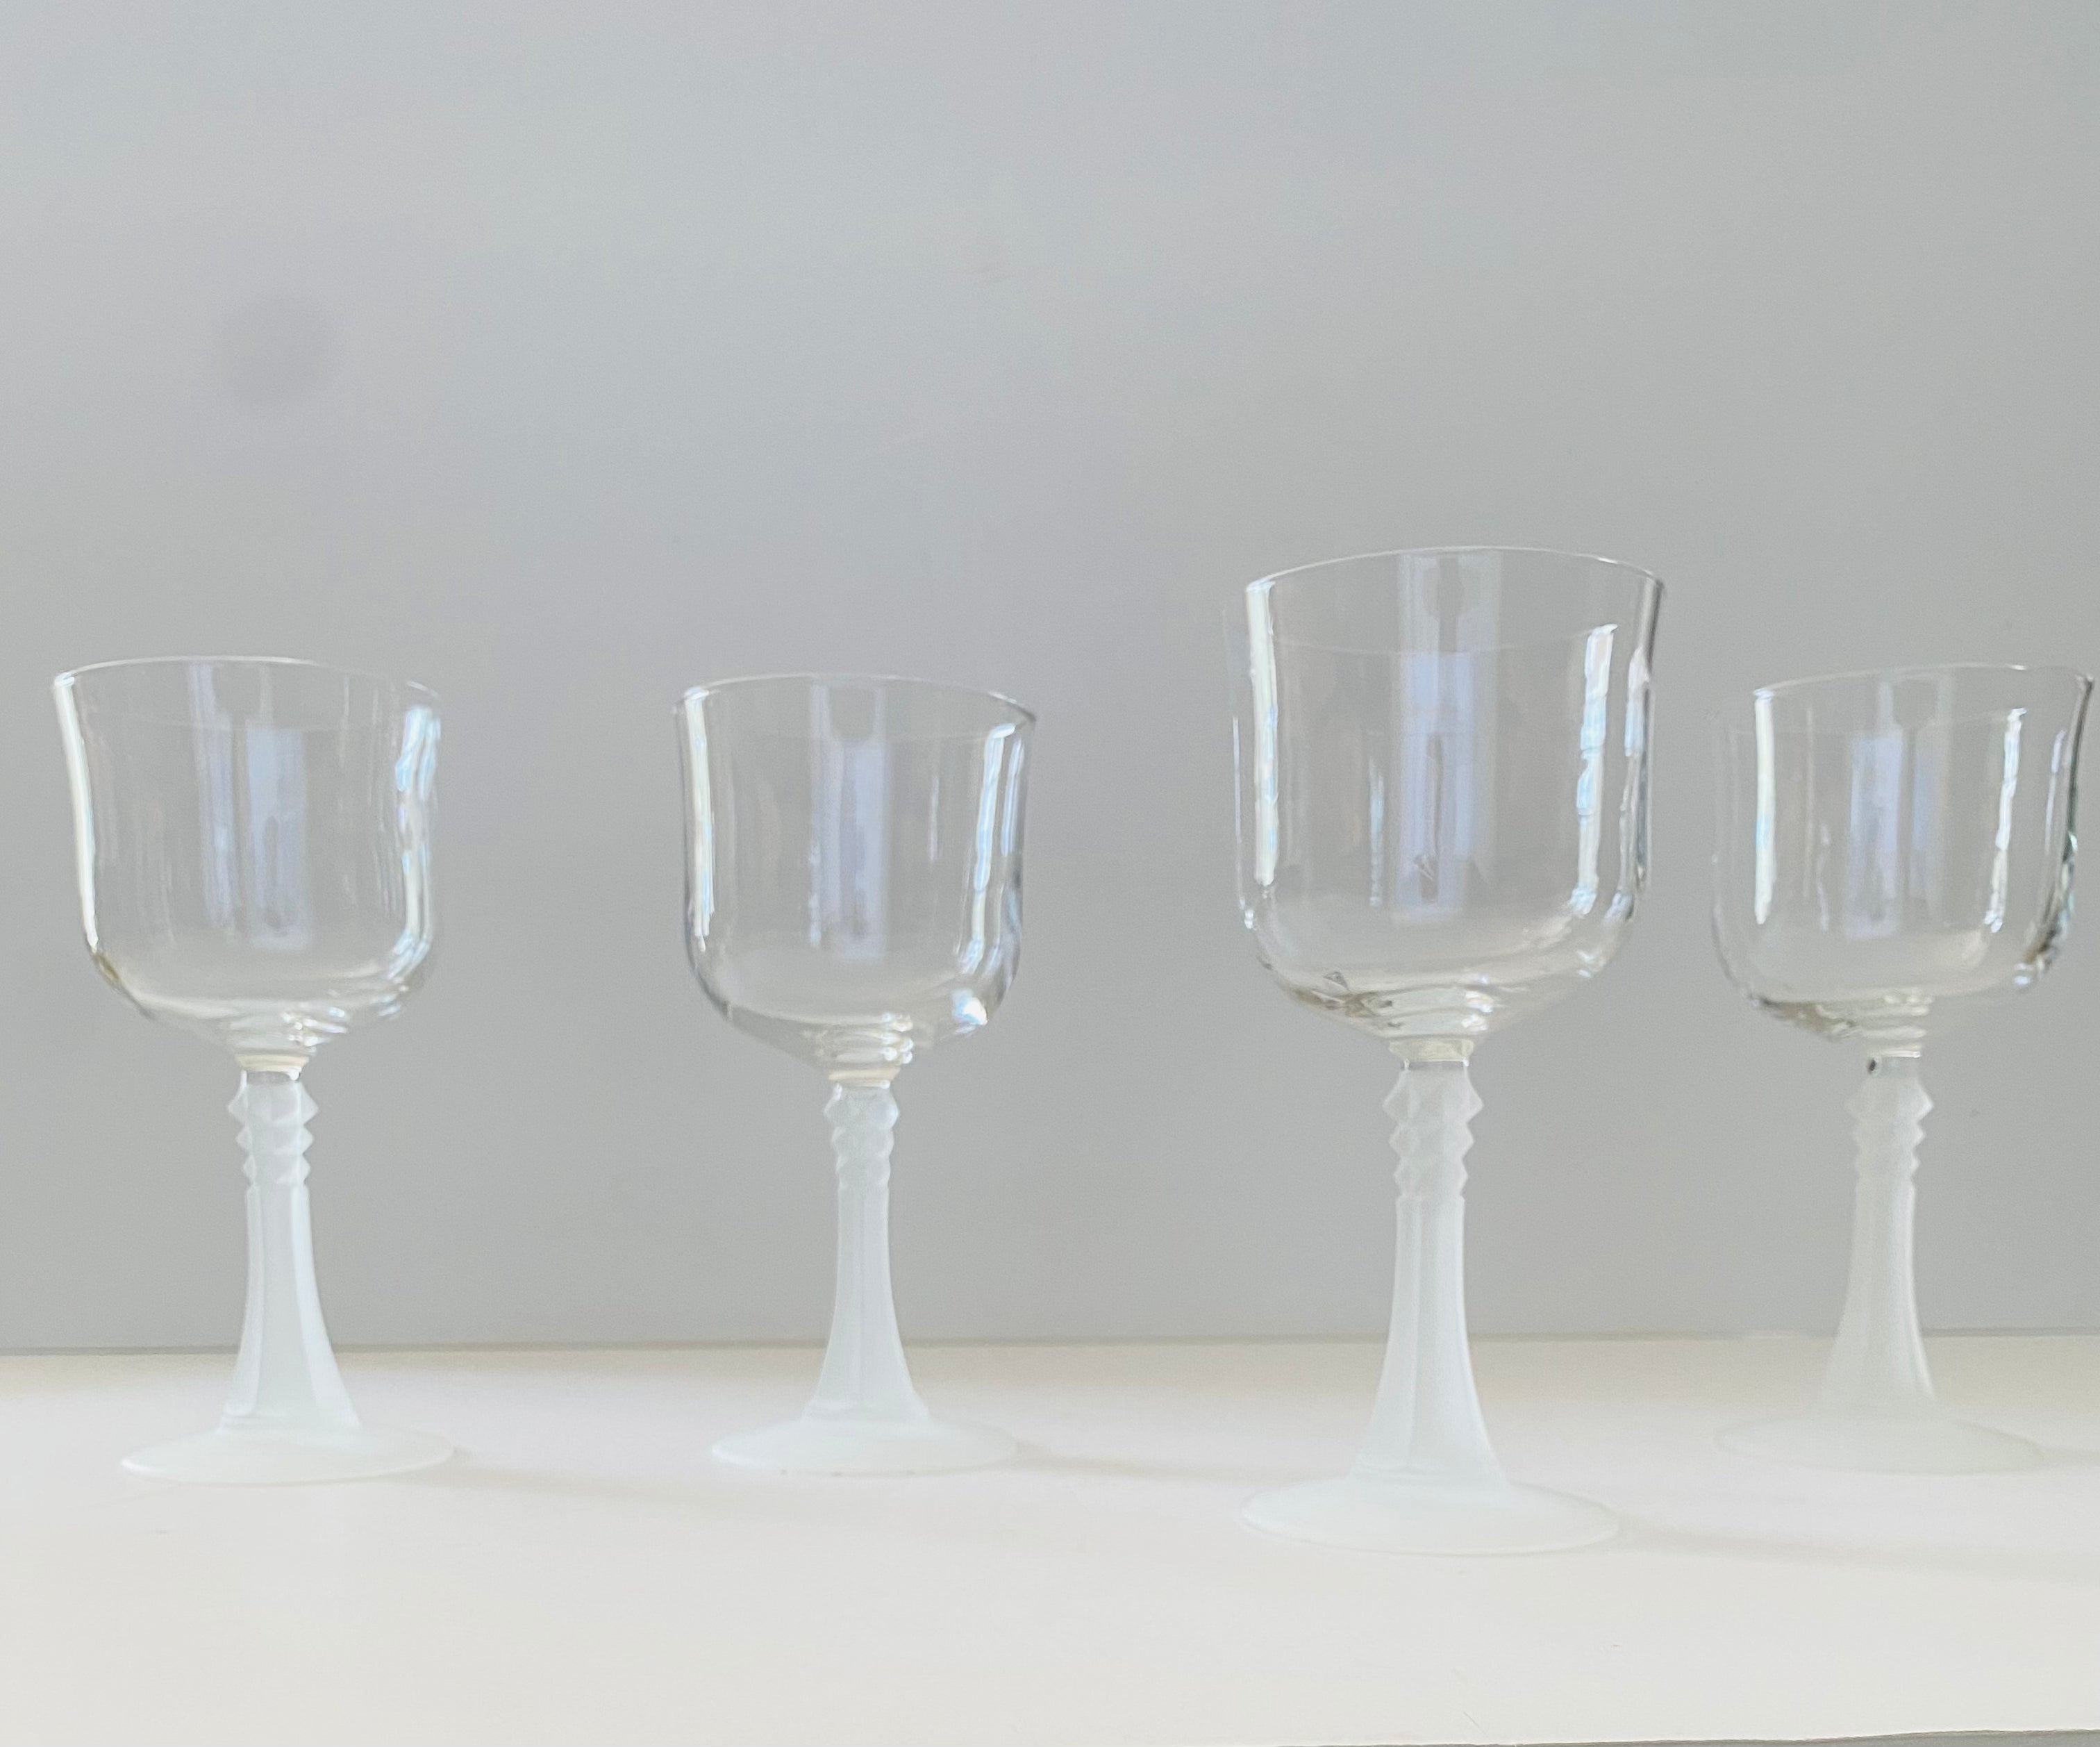 Cristal D'Arques Durand CRA37 Wine/Water Goblet With Frosted Stem Detail - Set of 4